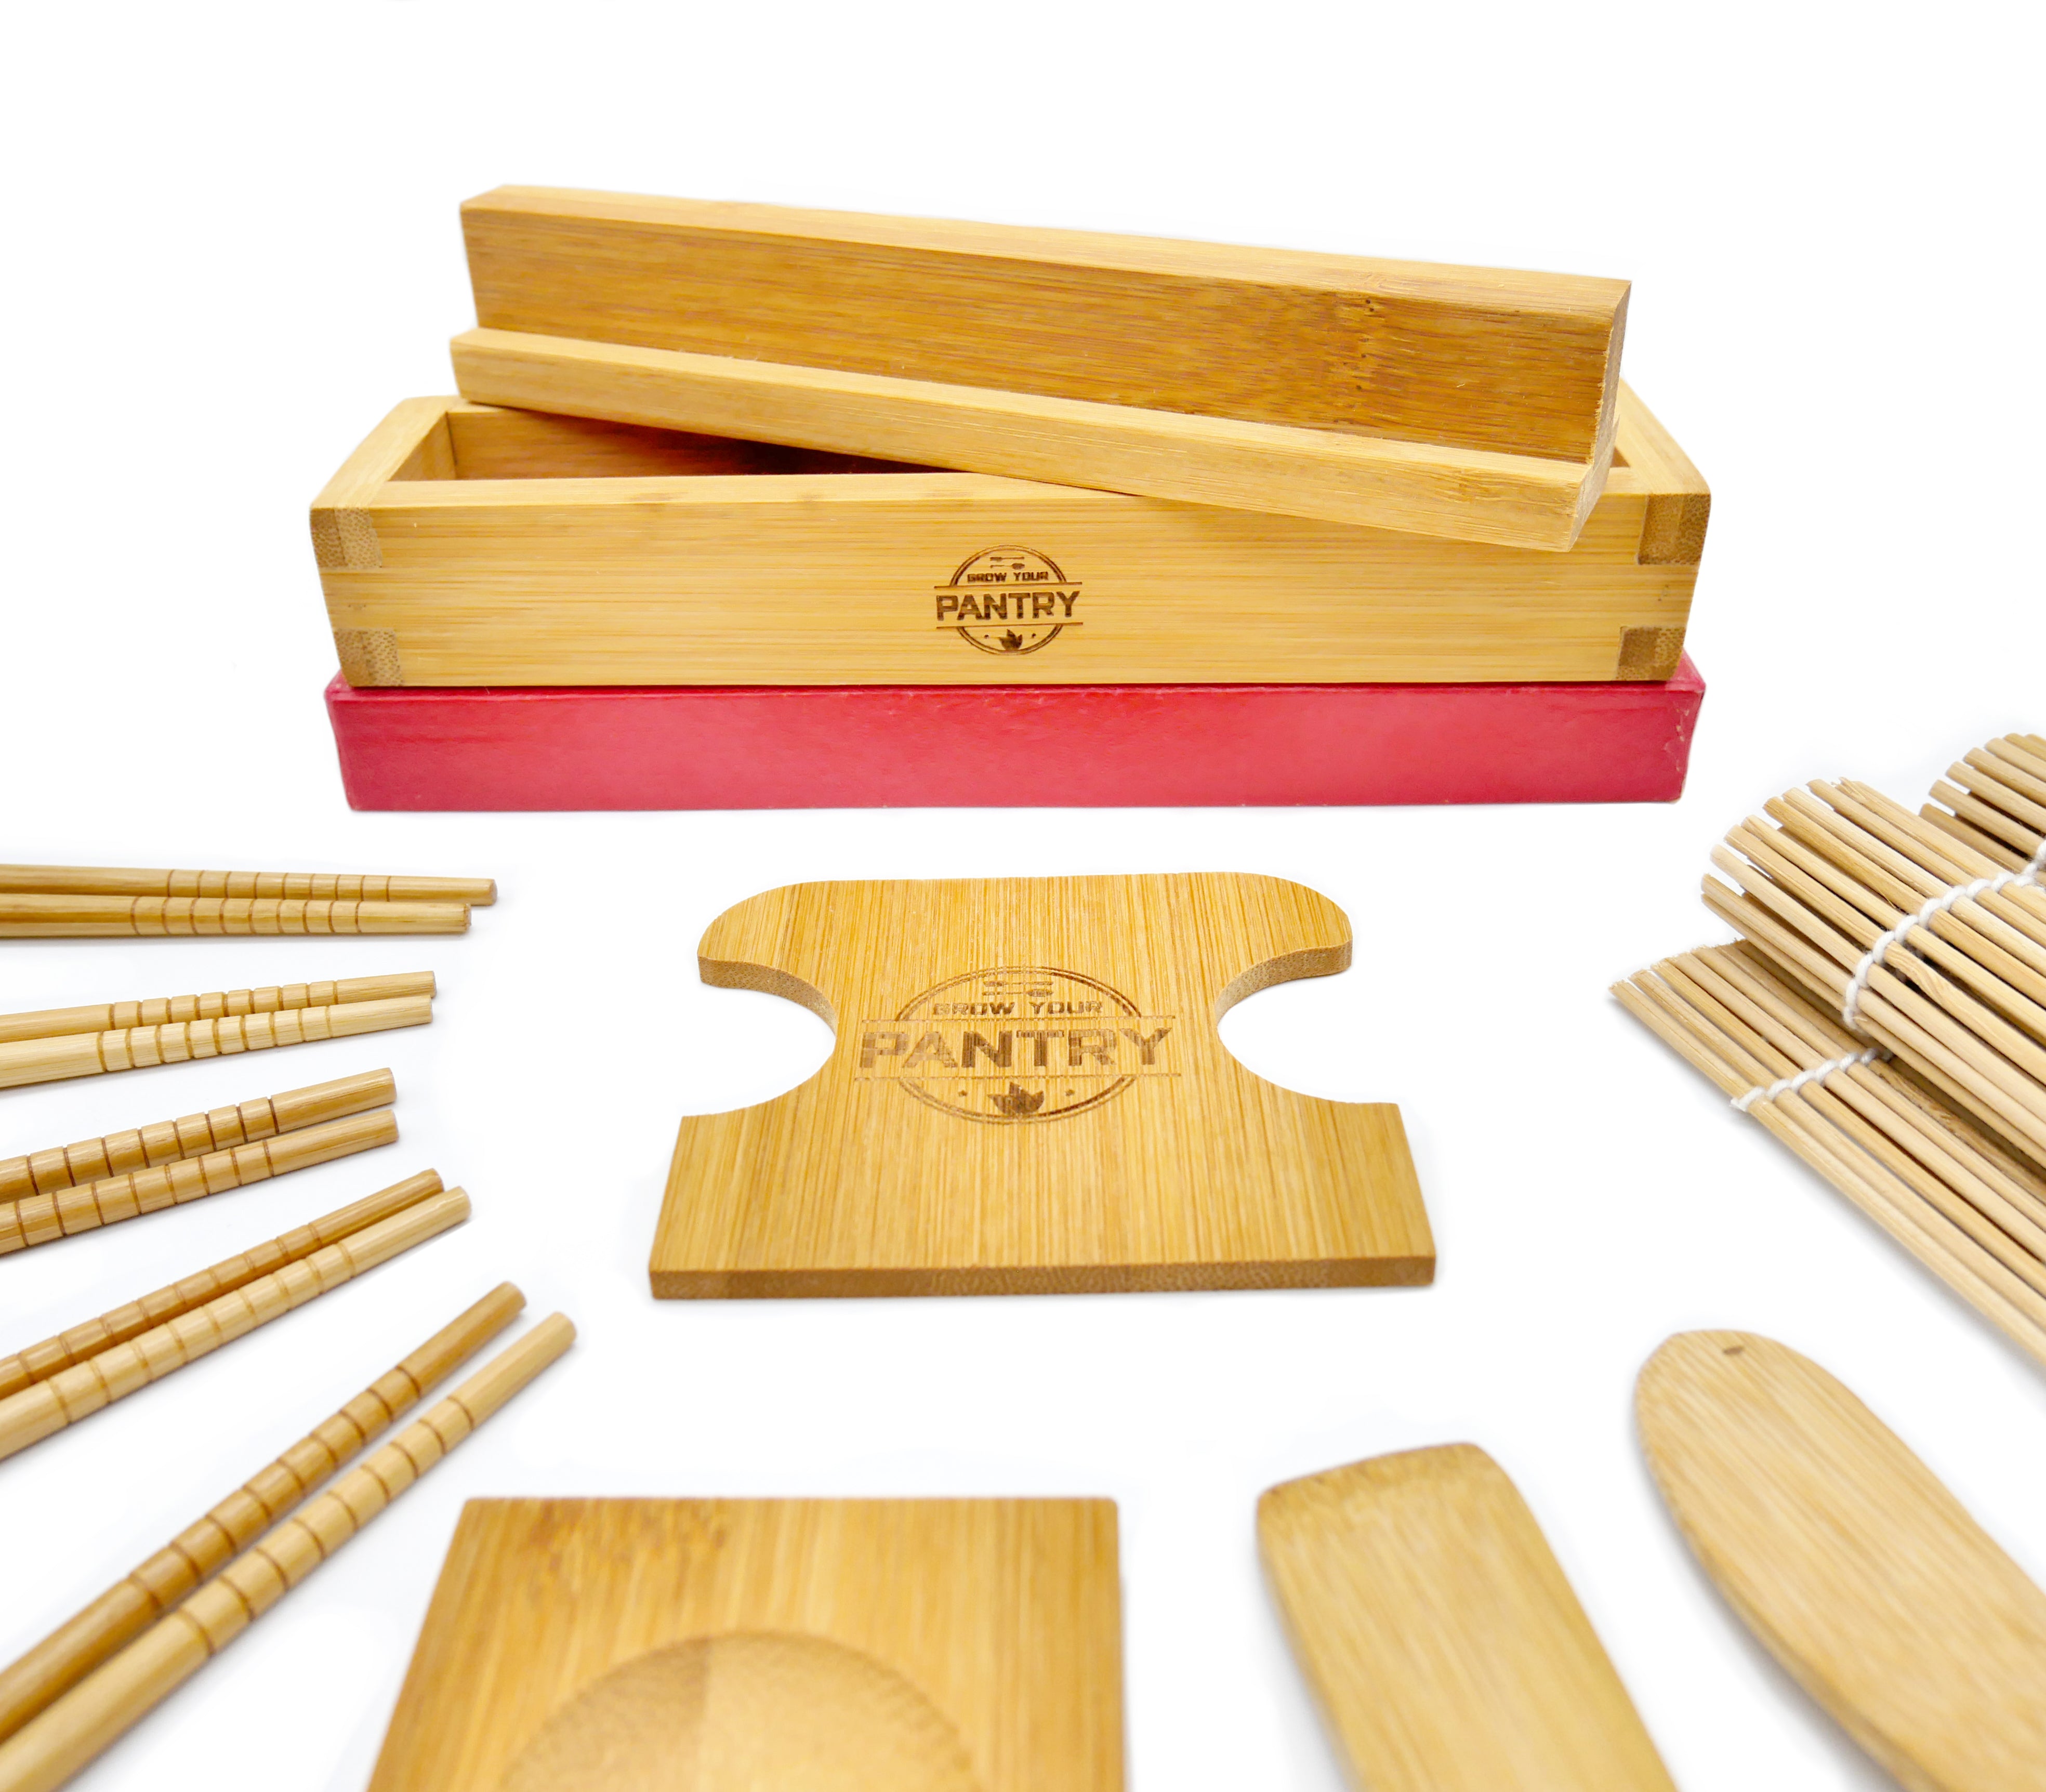 Grow Your Pantry Bamboo Sushi and Maki Making Kit - with Bamboo Sushi Rolling Mat, Maki Mold, Japanese Sauce Tray, Plus Chopsticks and More. Best Sushi Making Kit for